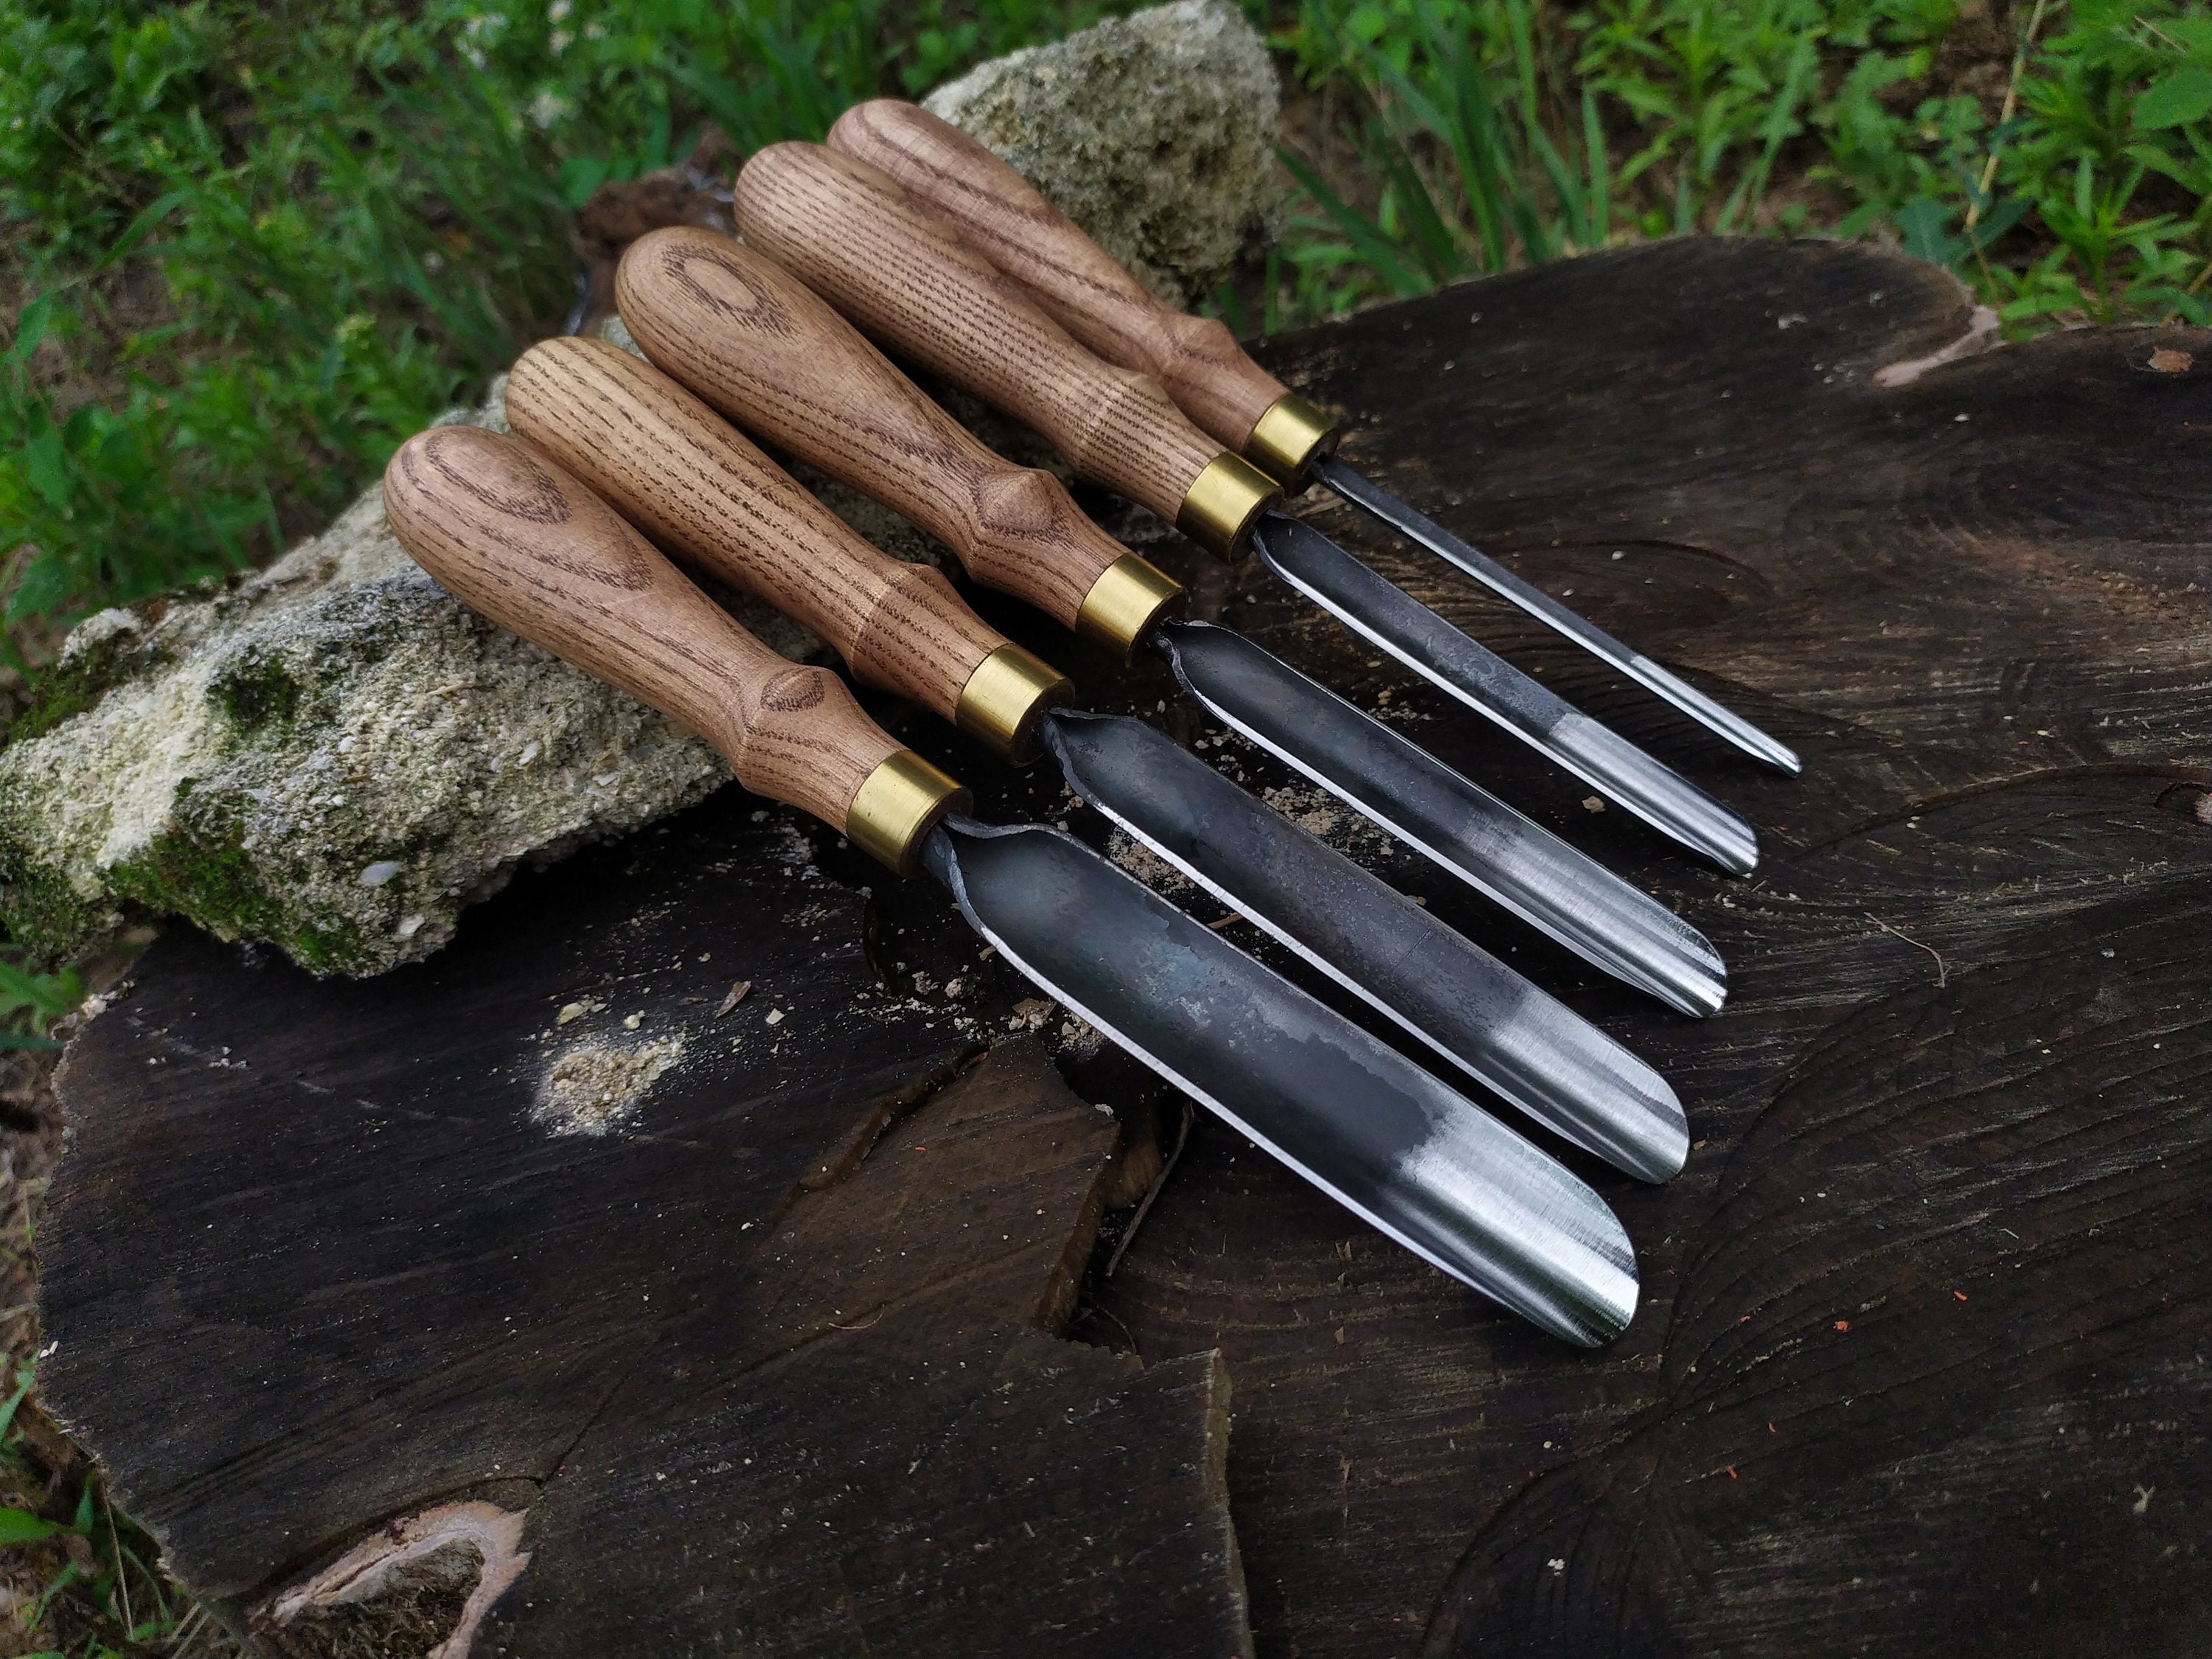 Wood Carving Set Knives for Small Sculpture Set With Wooden Blocks